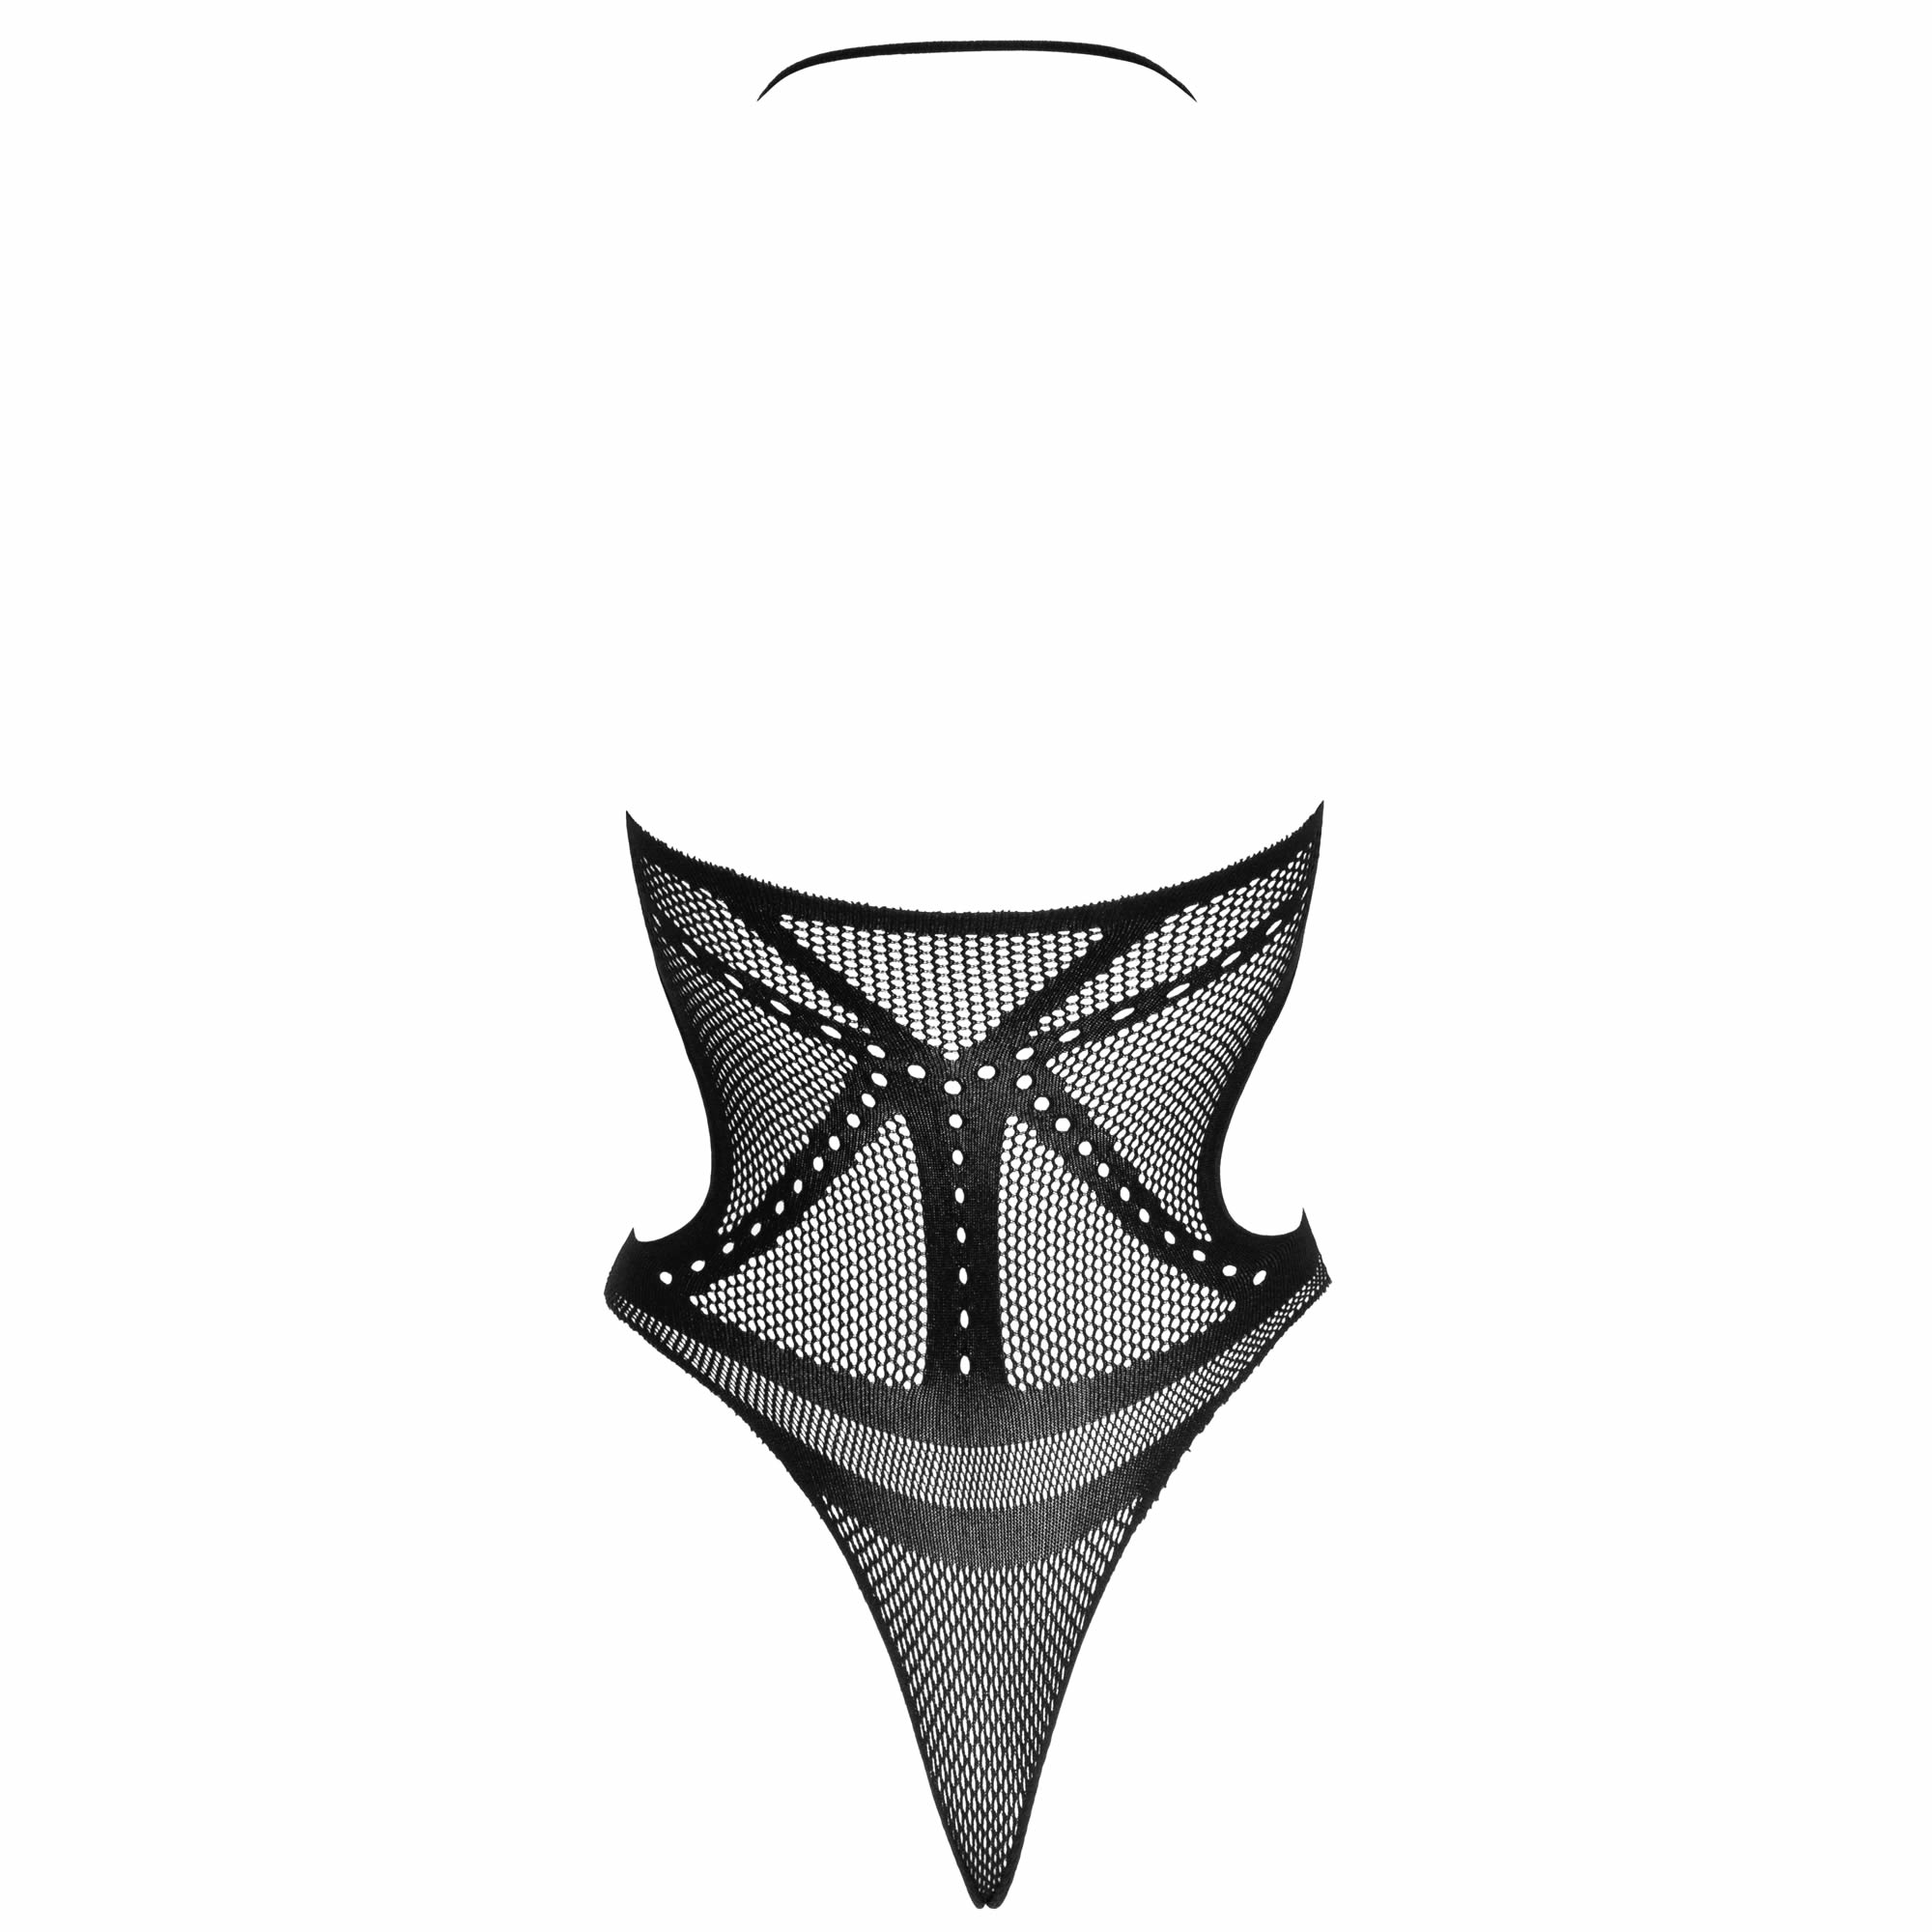 NO:XQSE Net Body with Harness Design